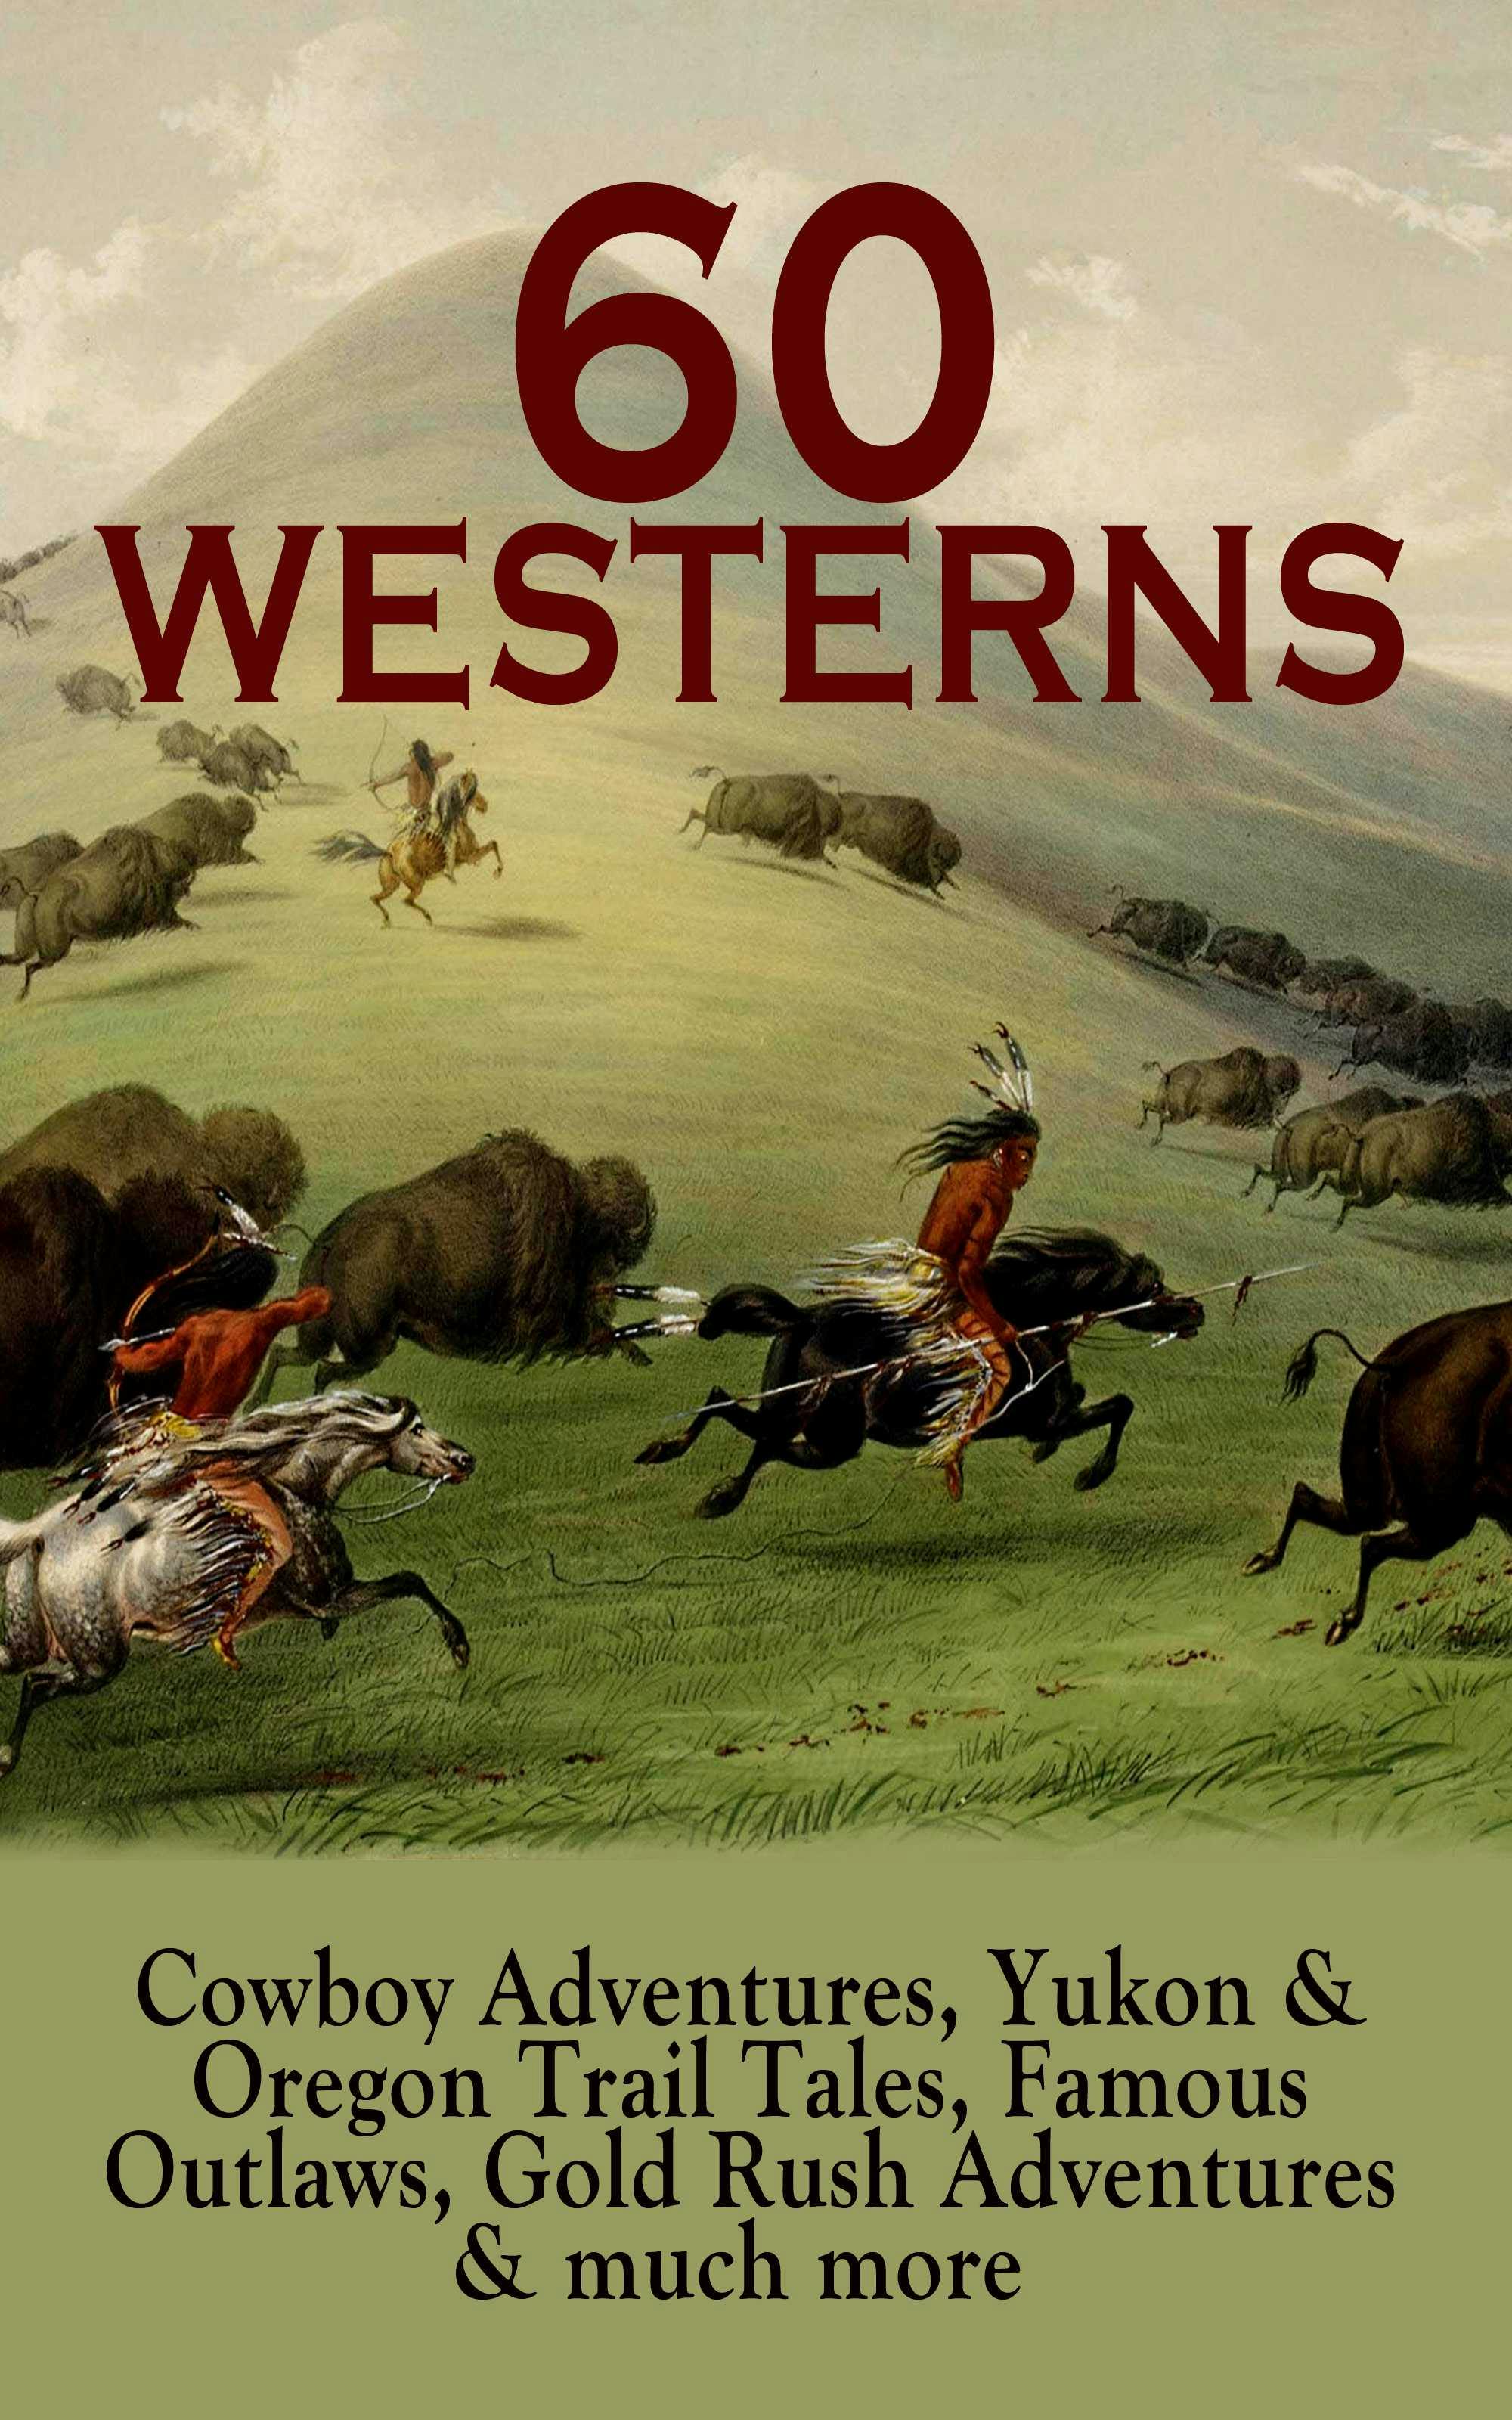 60 WESTERNS: Cowboy Adventures, Yukon & Oregon Trail Tales, Famous Outlaws, Gold Rush Adventures: Riders of the Purple Sage, The Night Horseman, The Last of the Mohicans, Rimrock Trail, The Hidden Children, The Law of the Land, Heart of the West, A Texas Cow-Boy, The Prairie… - undefined